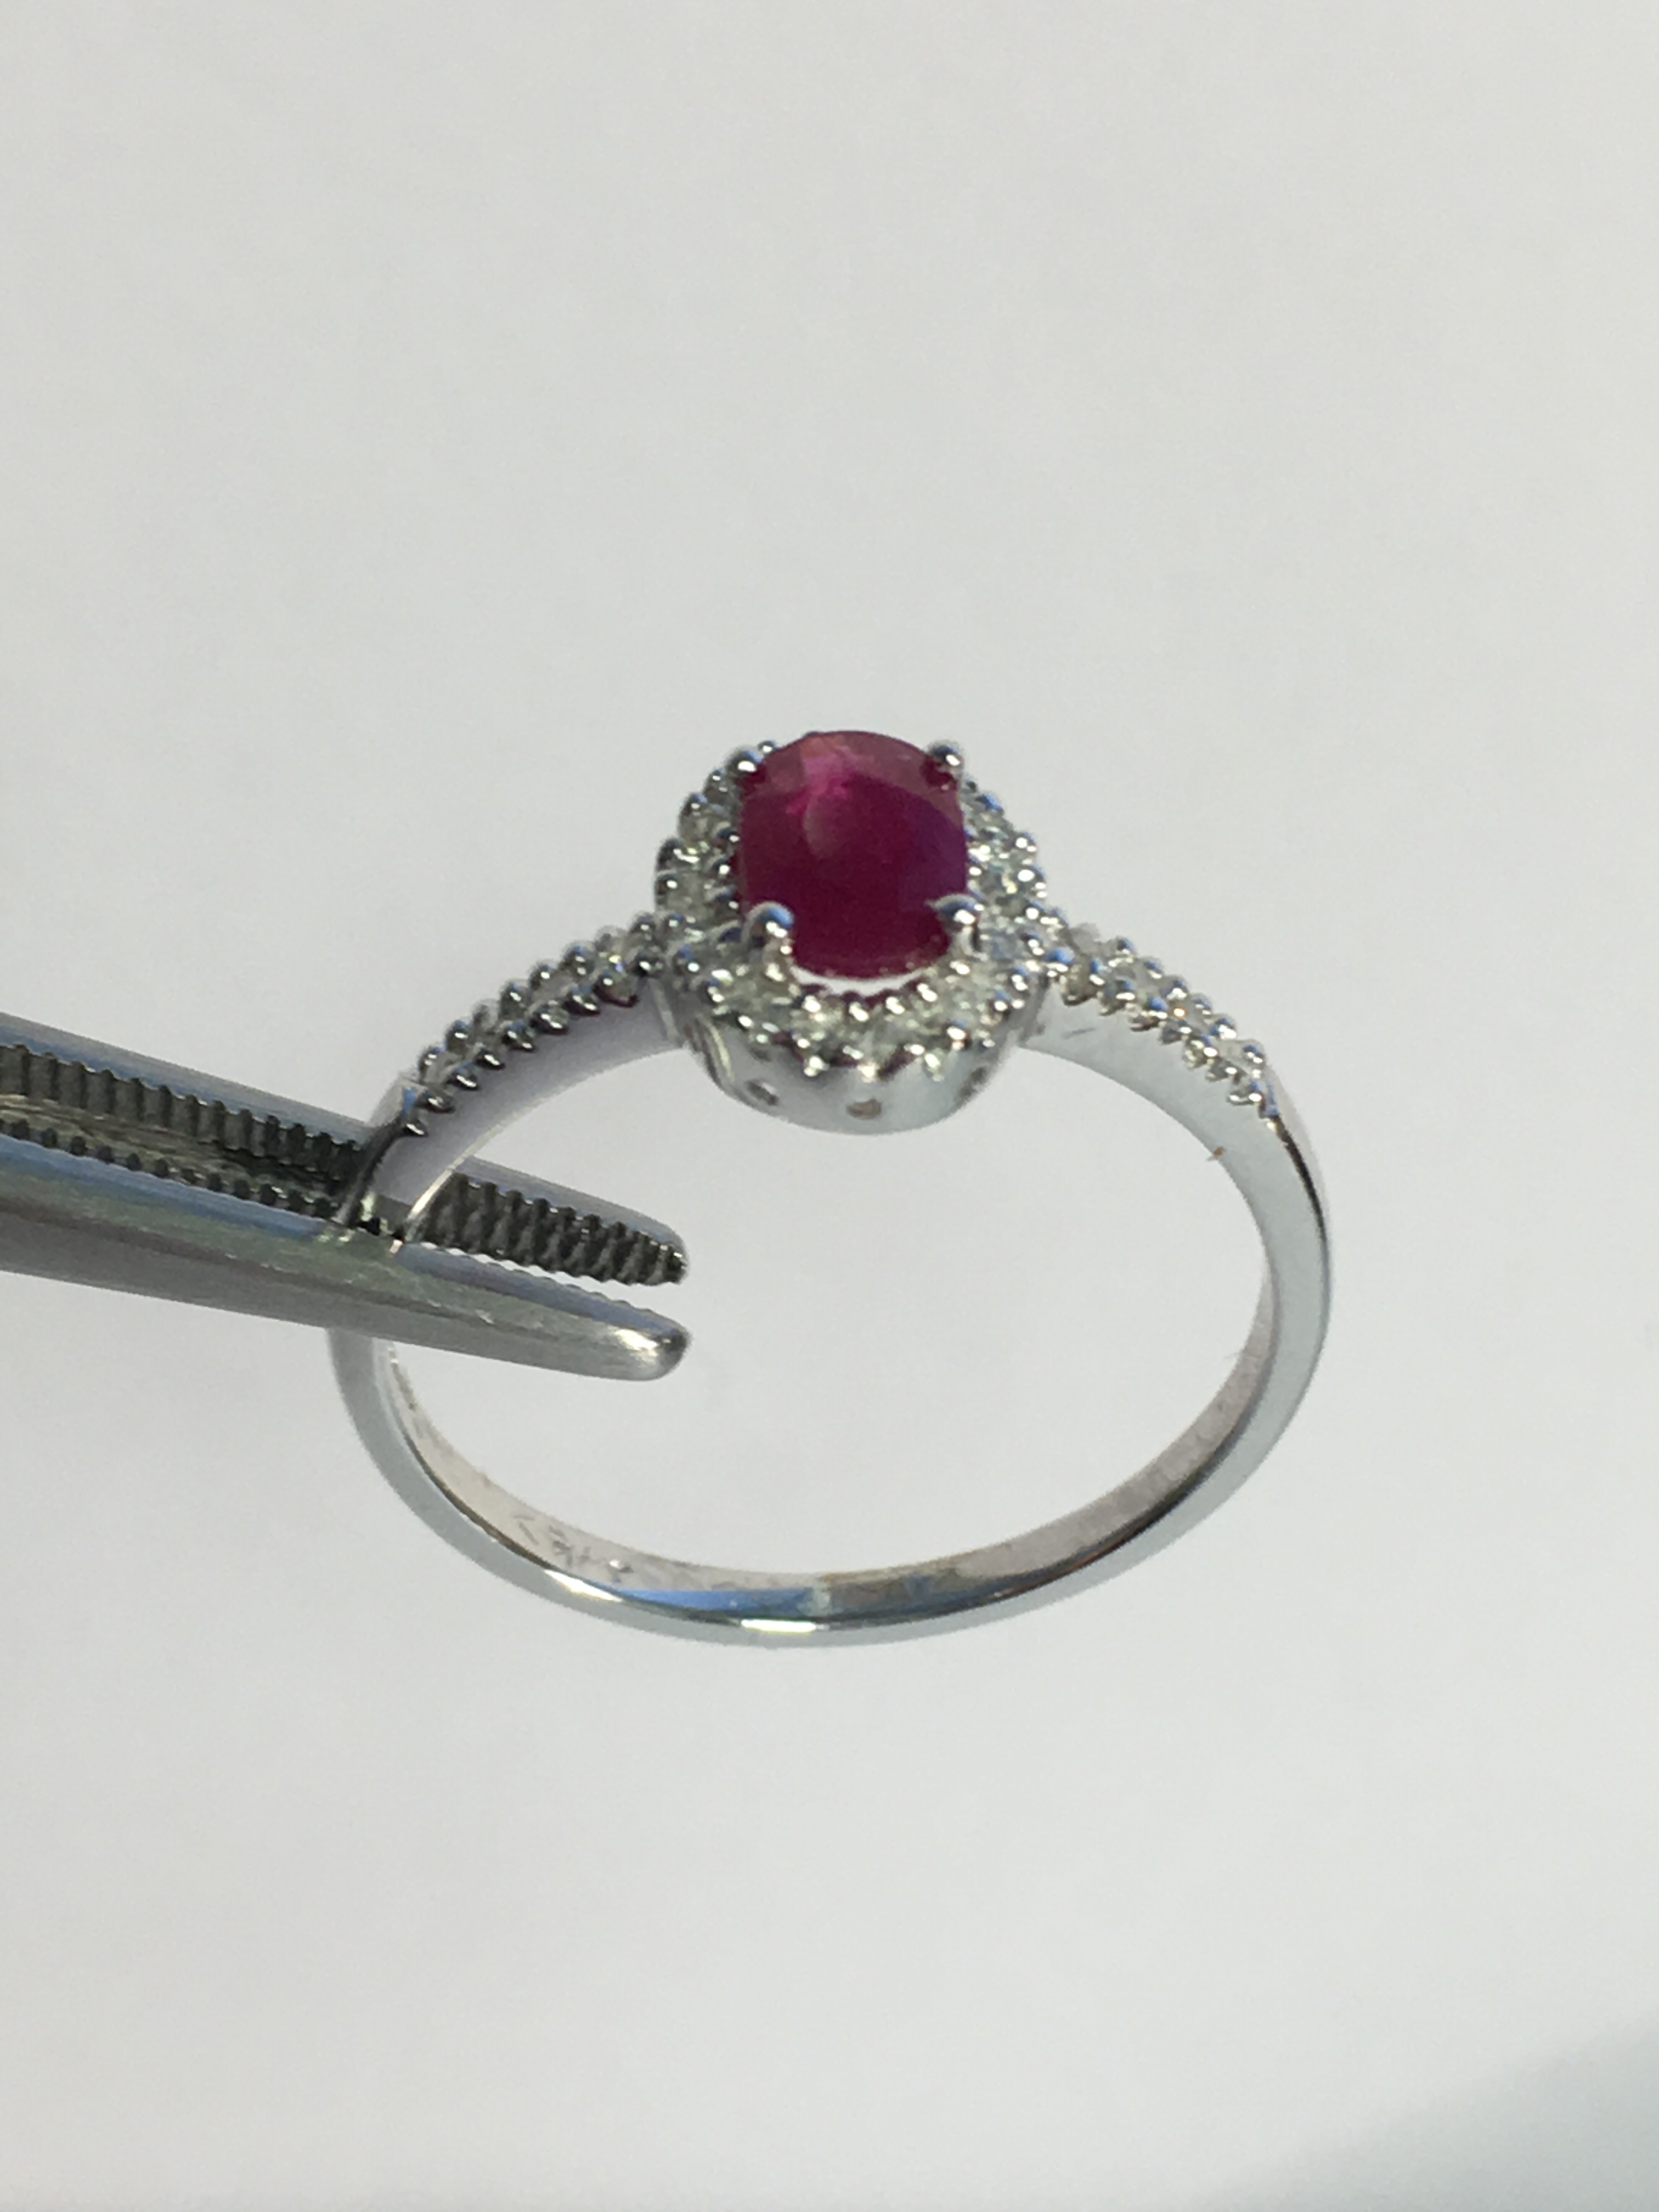 9k White gold ladies ring set with an oval Ruby and diamond surround